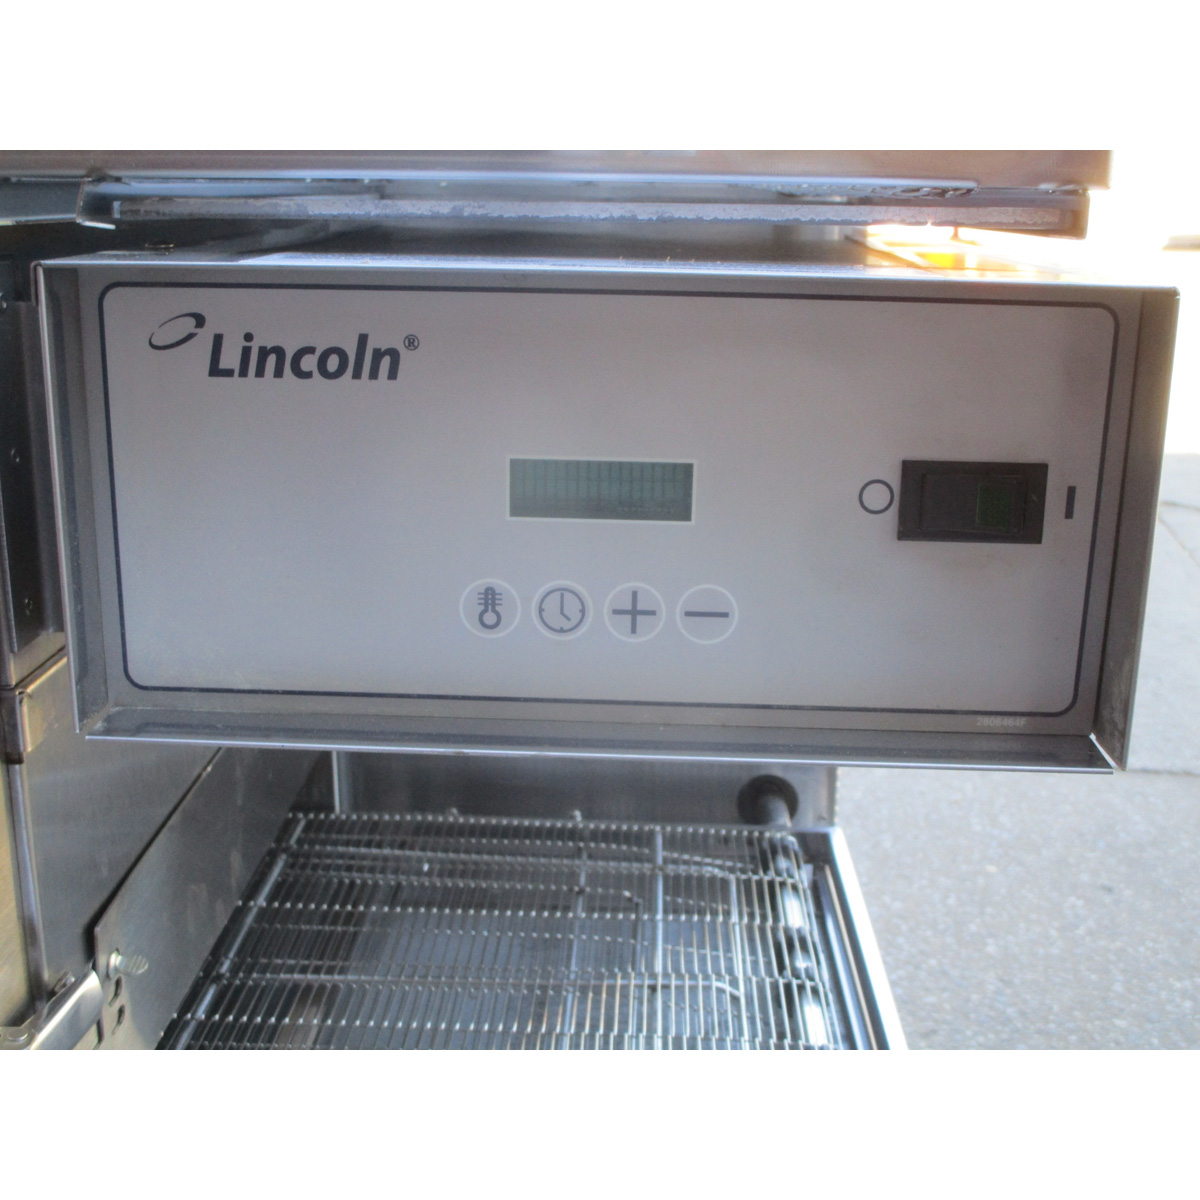 Lincoln 1133-000-U-K1837 Conveyor Pizza Oven, Used Very Good Condition image 8